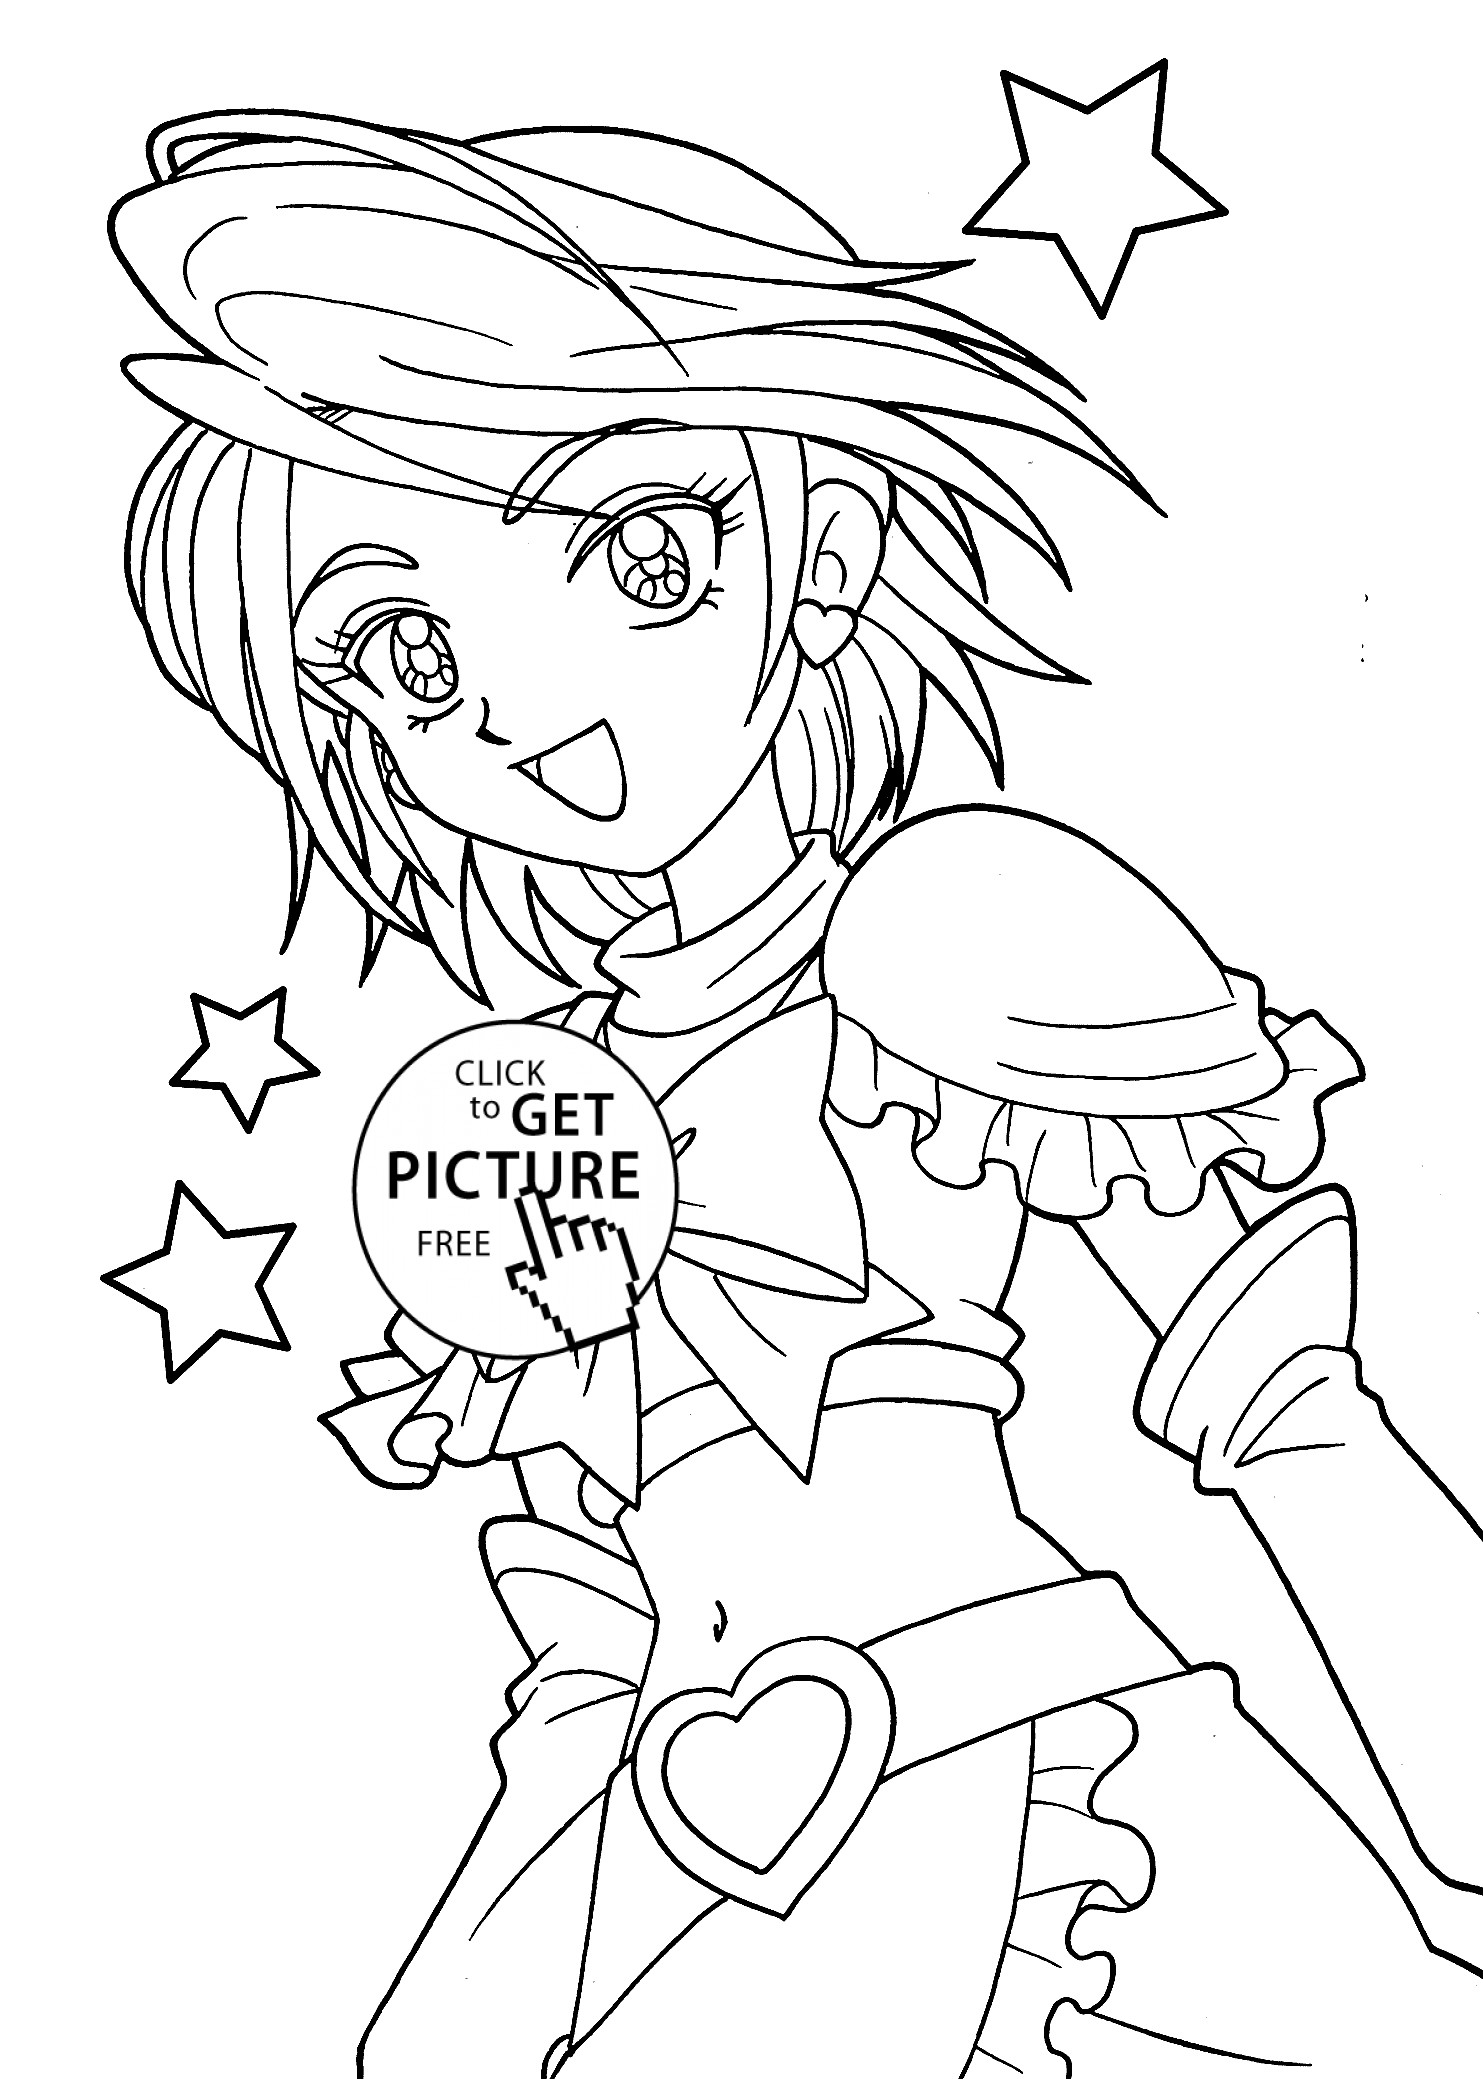 Printable Coloring Pages For Girls
 Cute Anime Girl Coloring Pages to Print